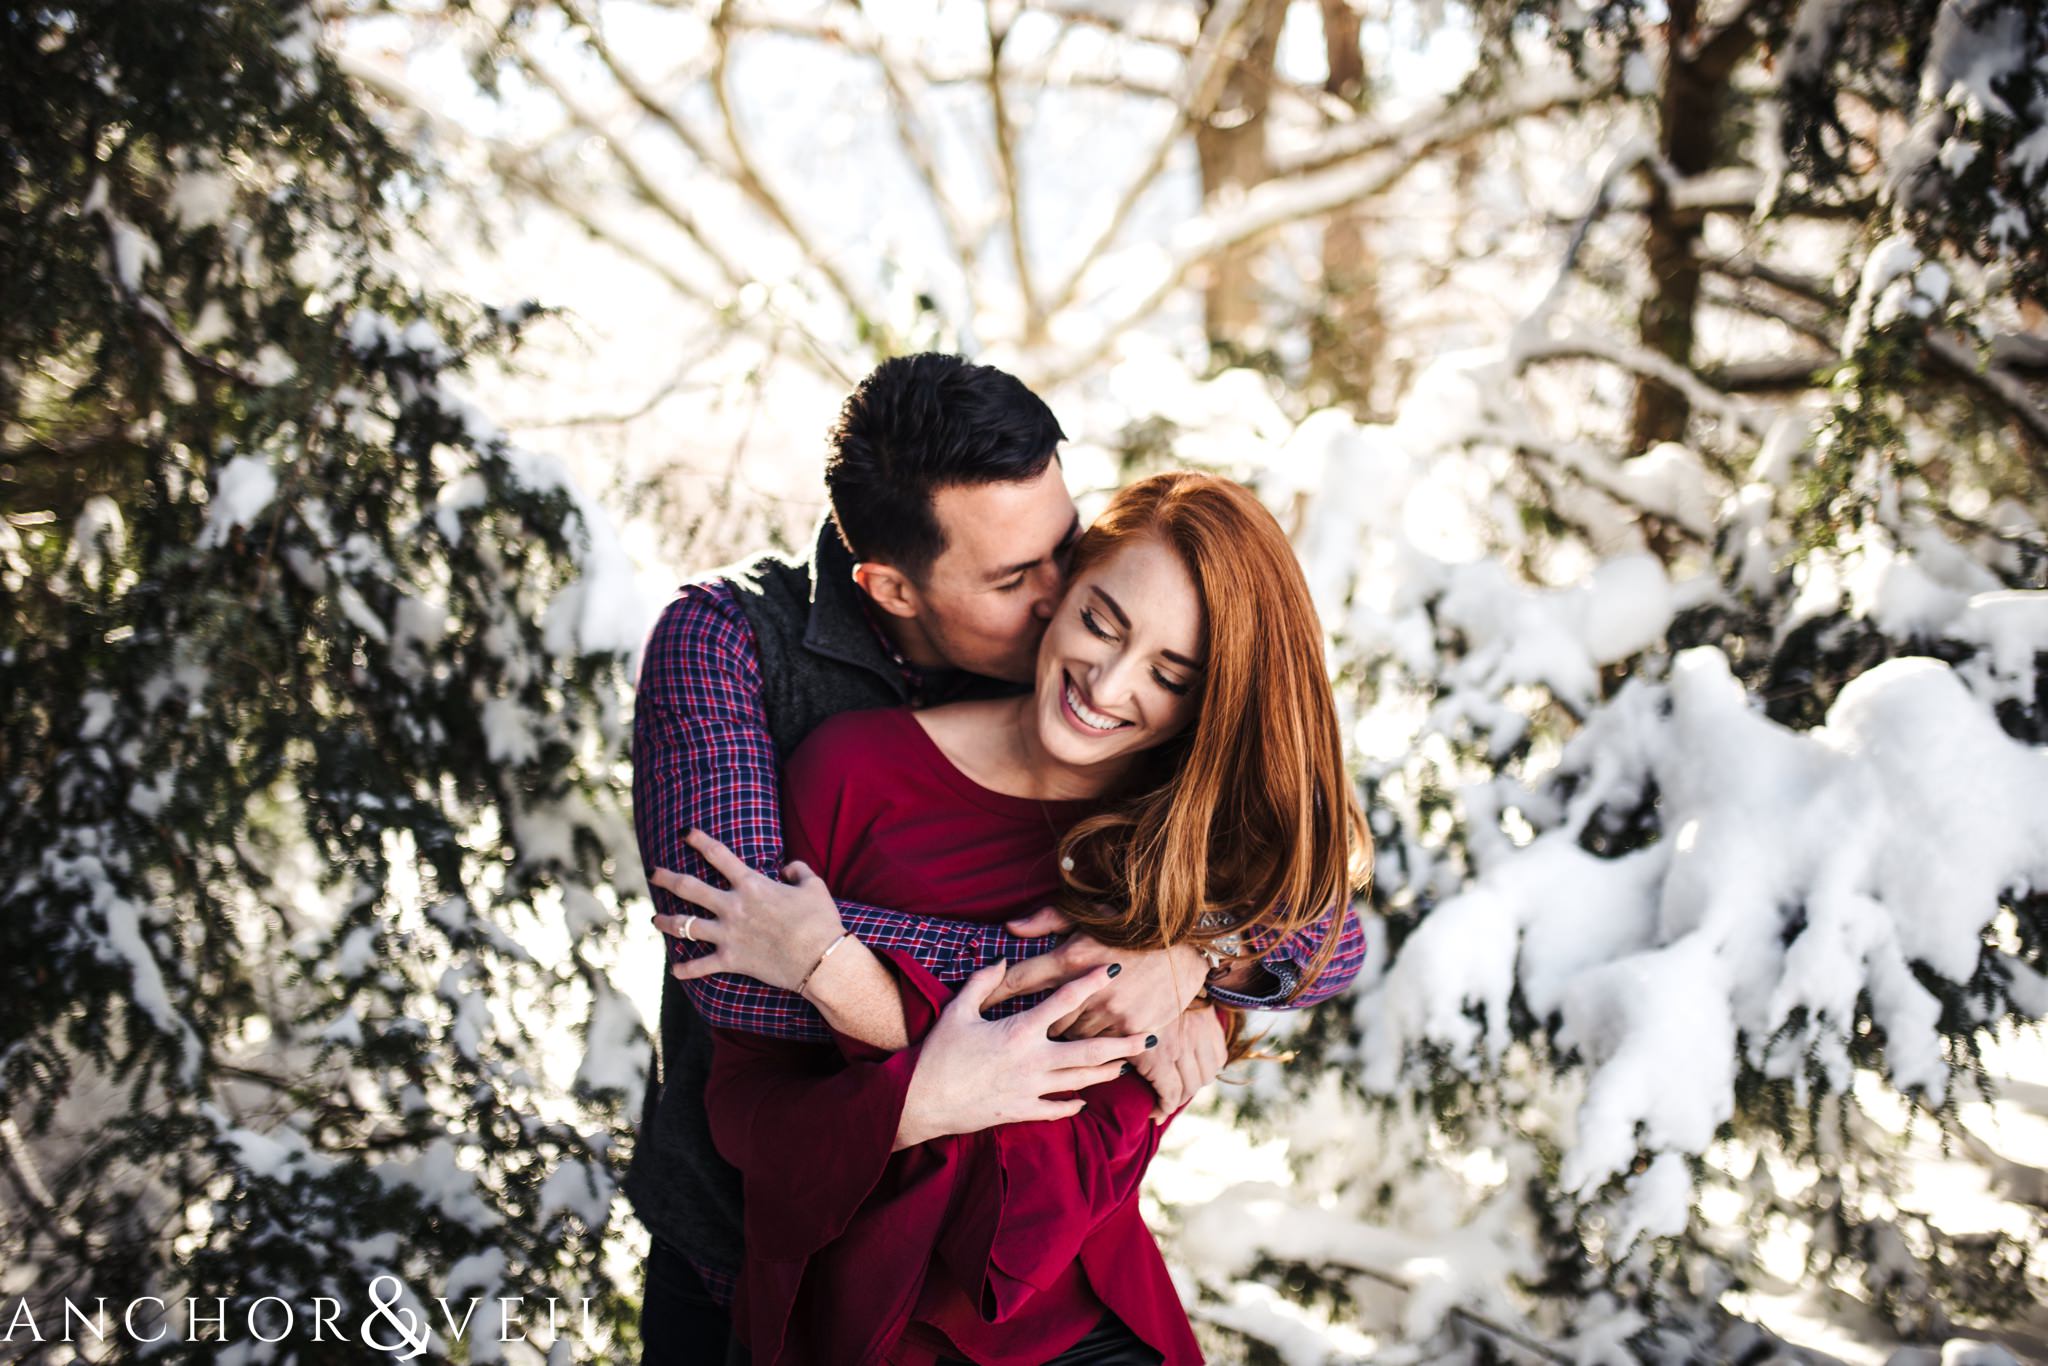  Holding her tight during their Snowy Asheville Engagement Session